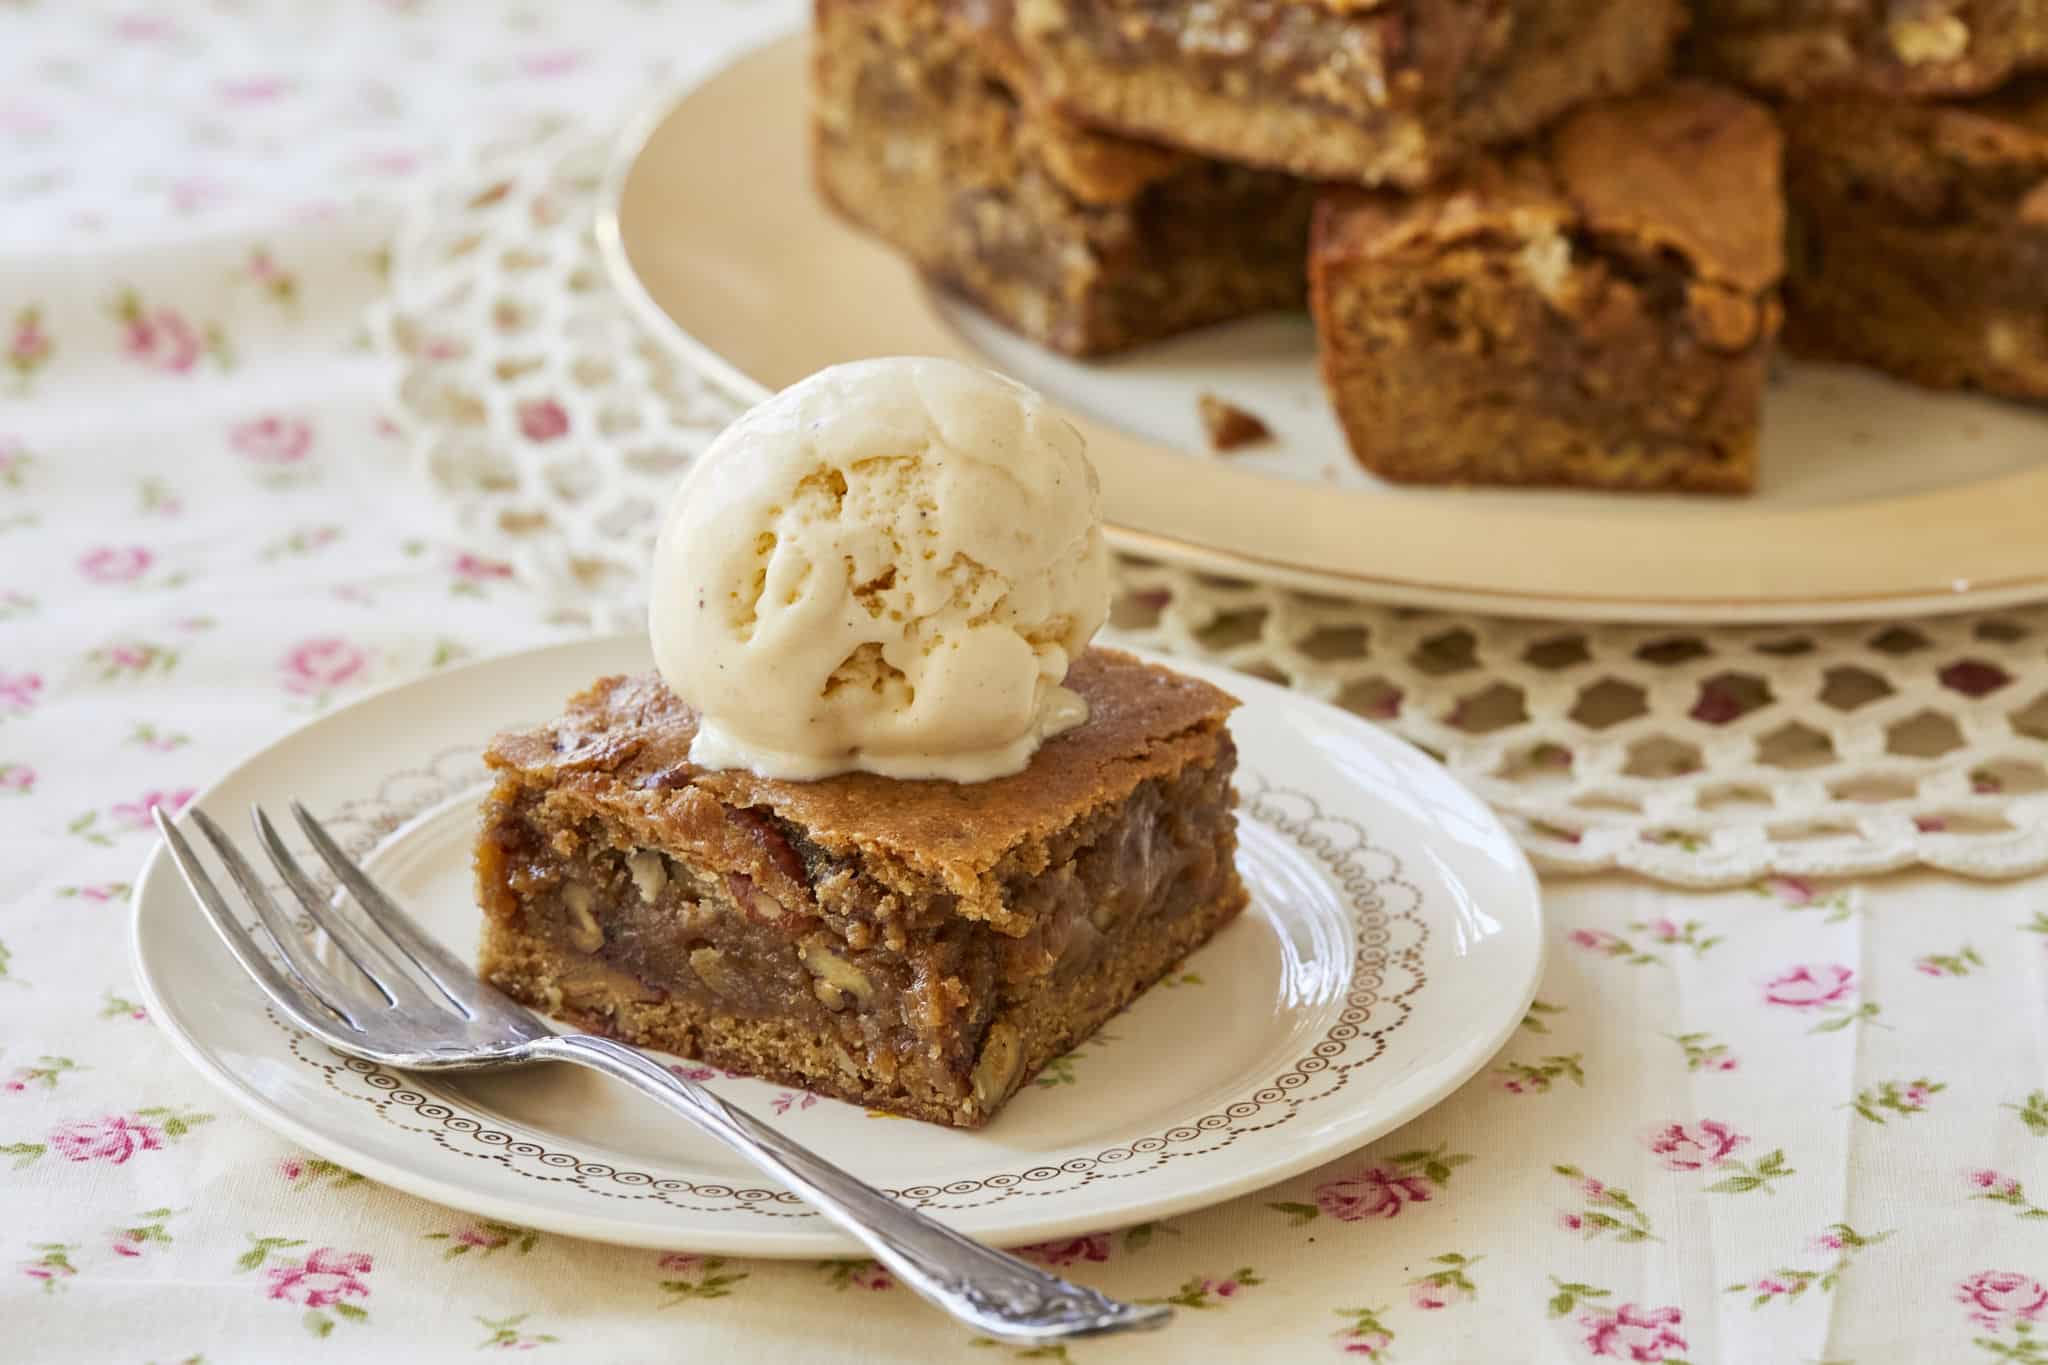 A scoop of vanilla ice cream is served on top of a homemade Maple Pecan Blondie. The center of the blondie looks chewy and moist with peaks of chopped up, toasted pecans